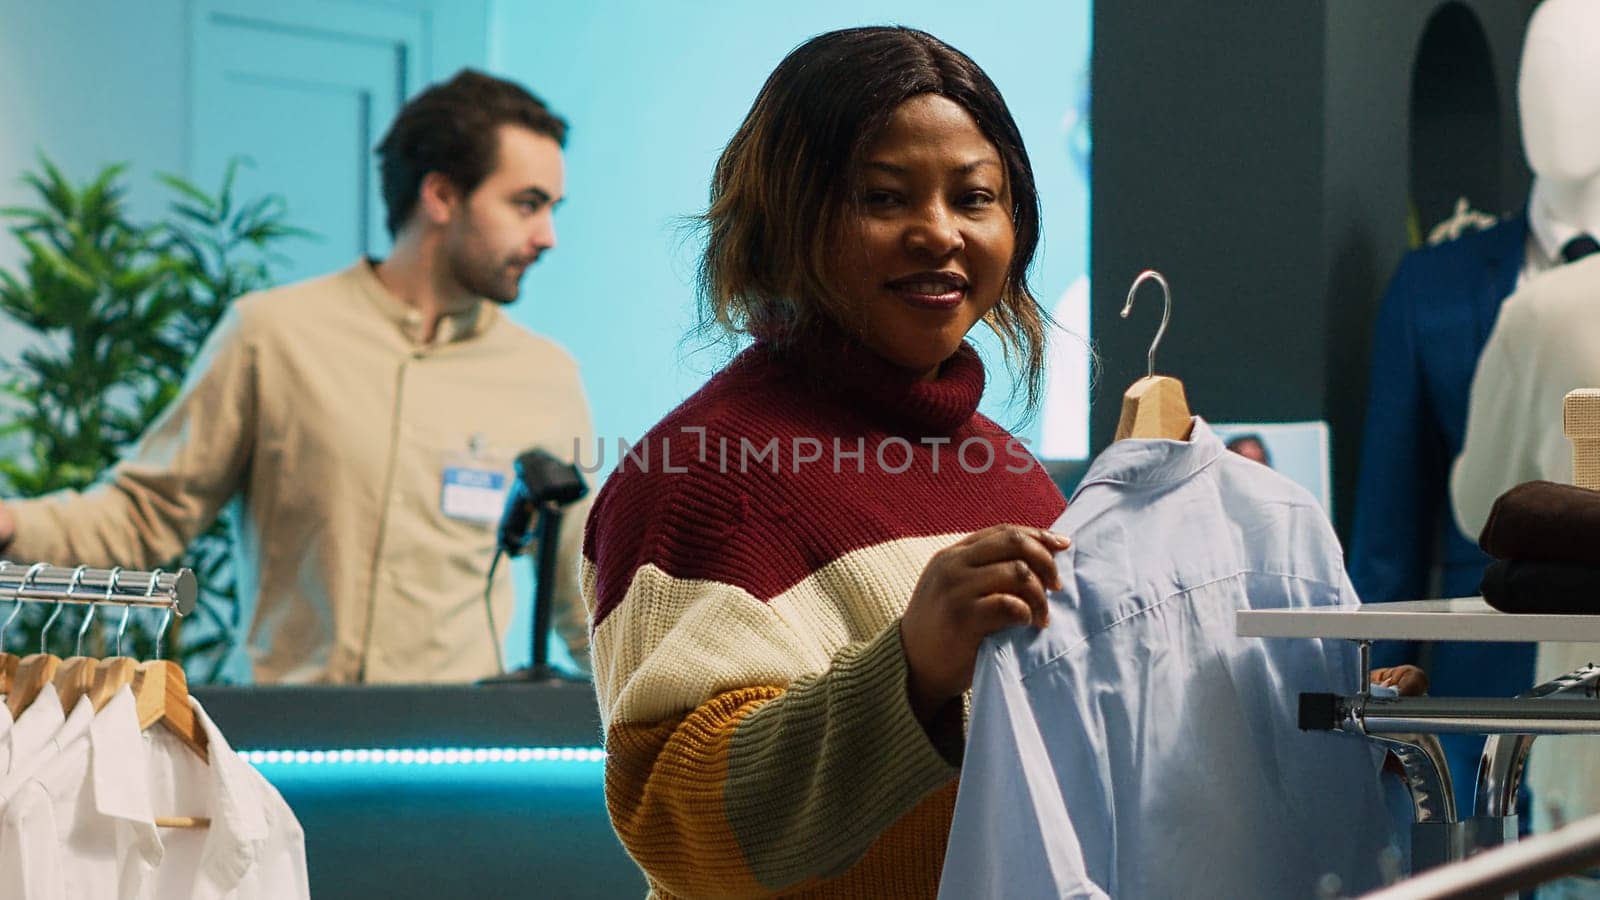 Female client looking at clothes on hangers and racks by DCStudio